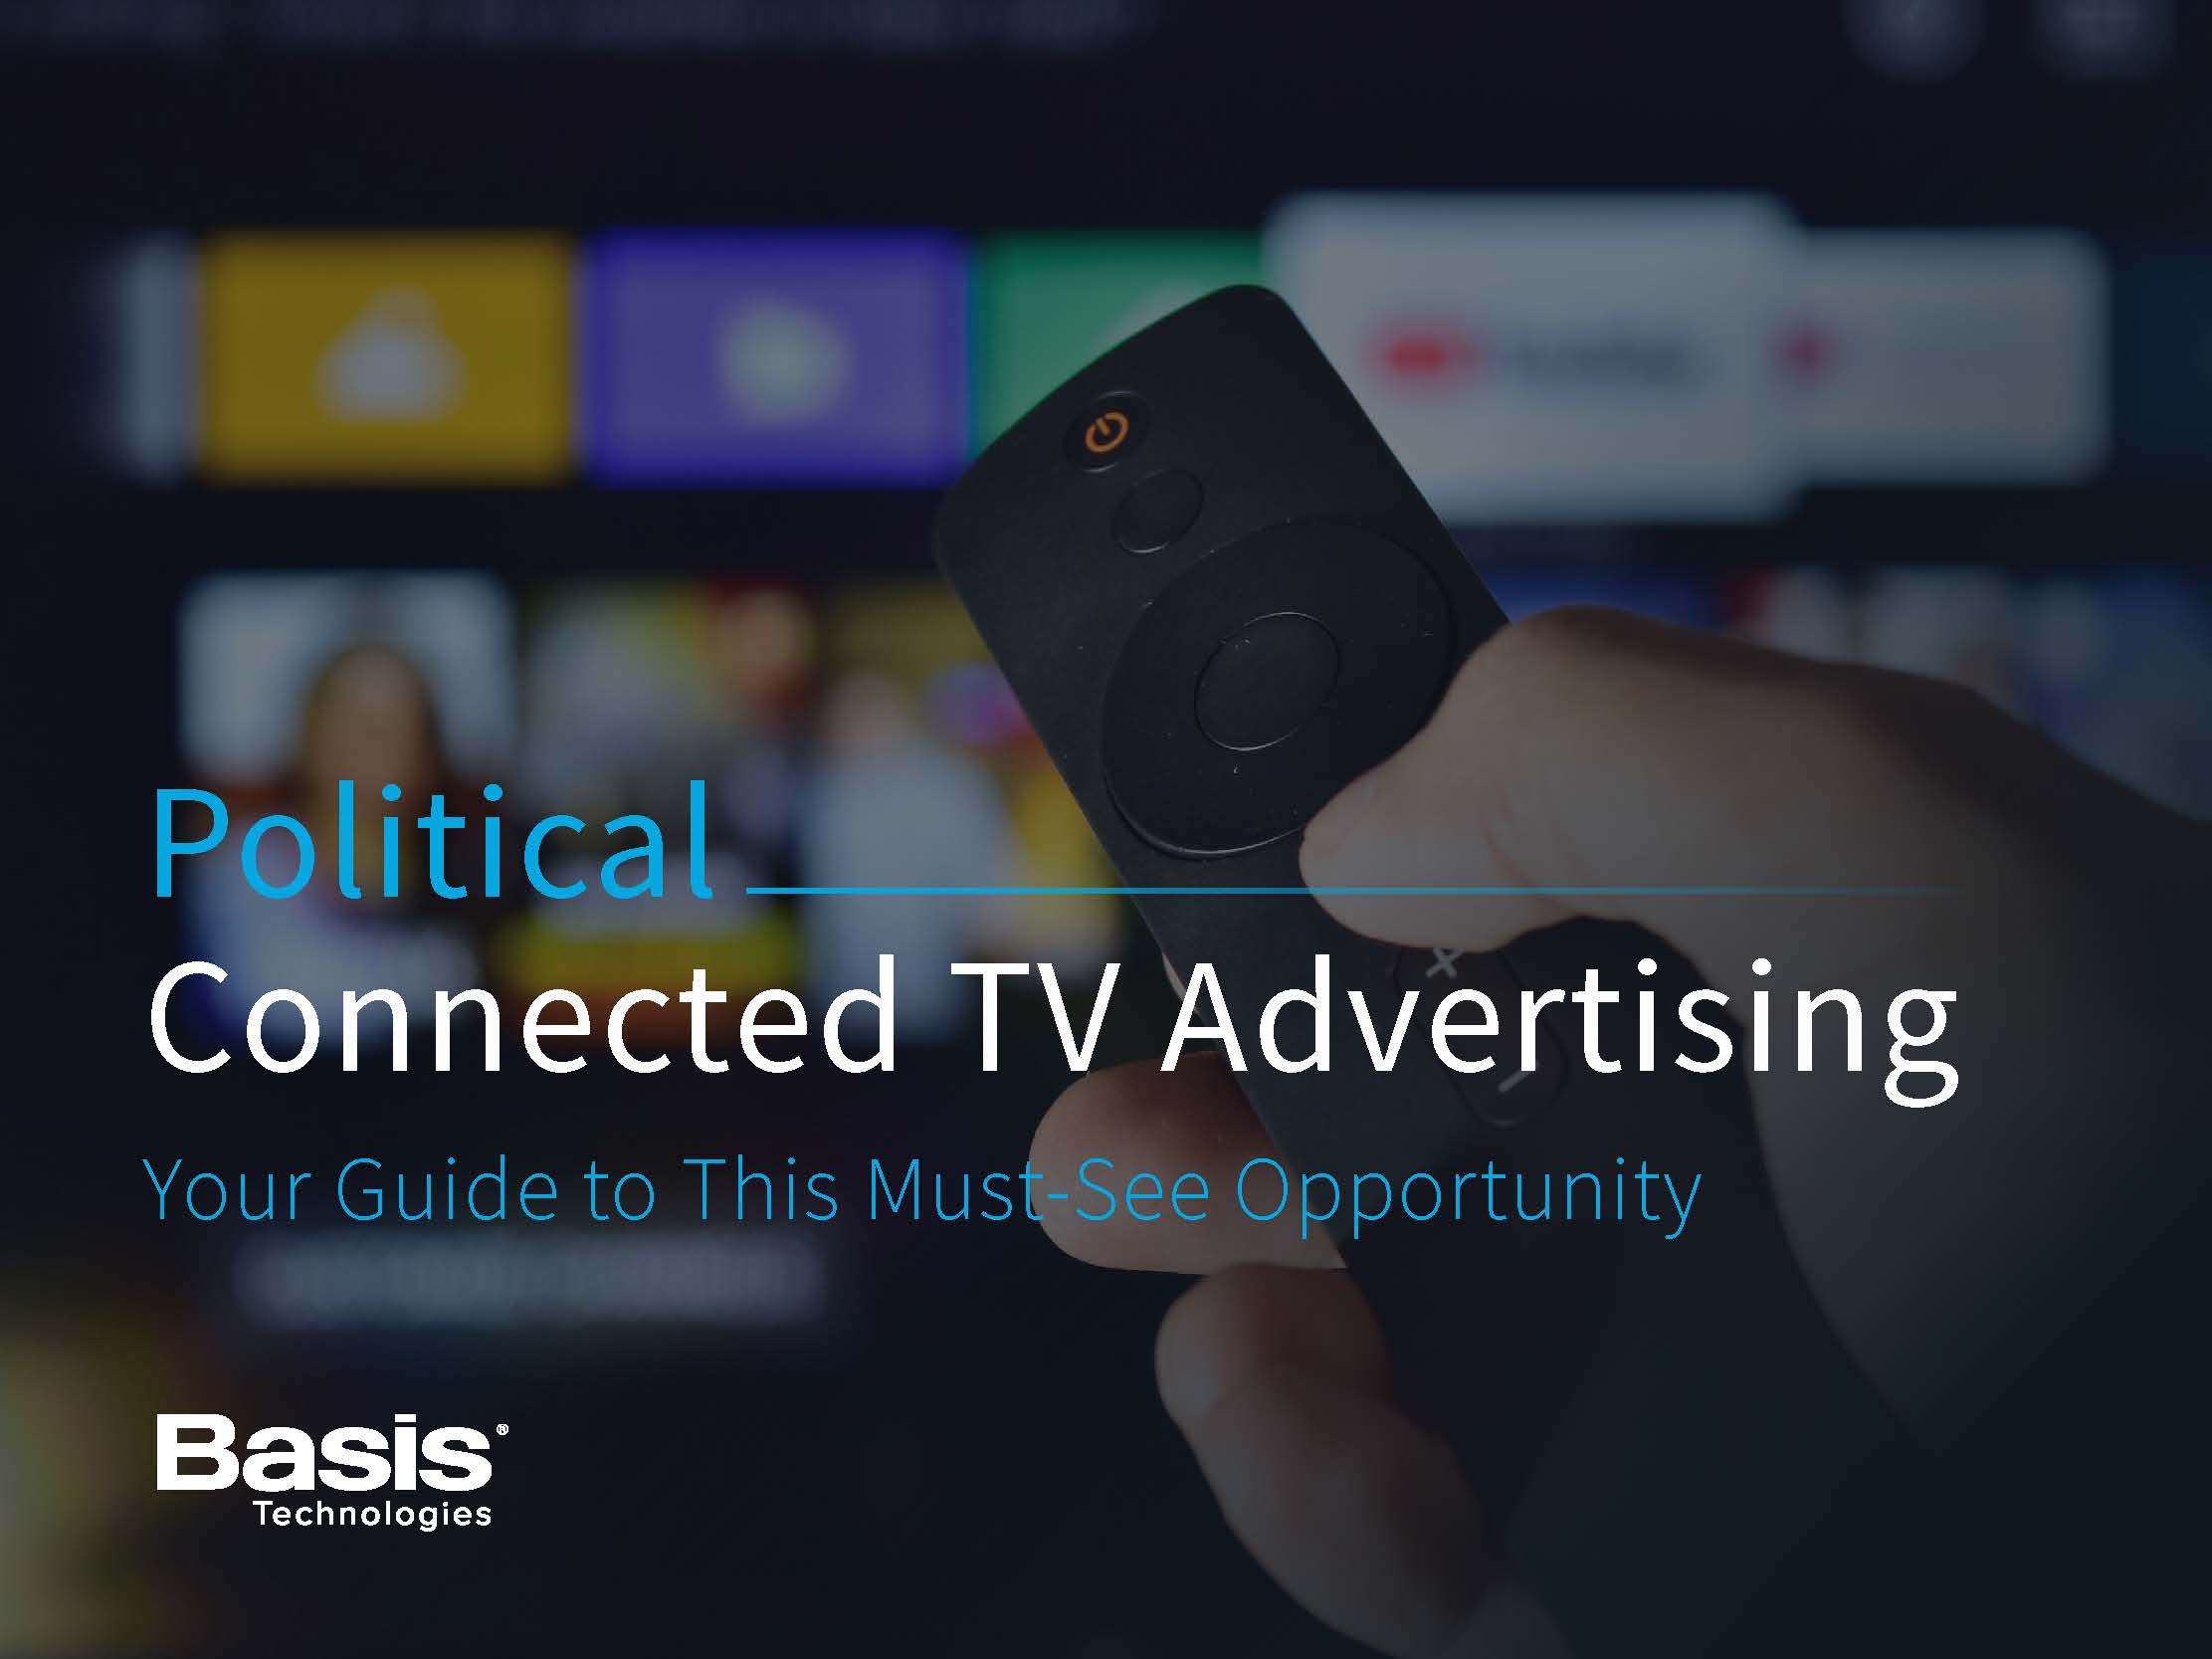 Cover Image ofPolitical Connect TV Advertising Guide - Basis Technologies